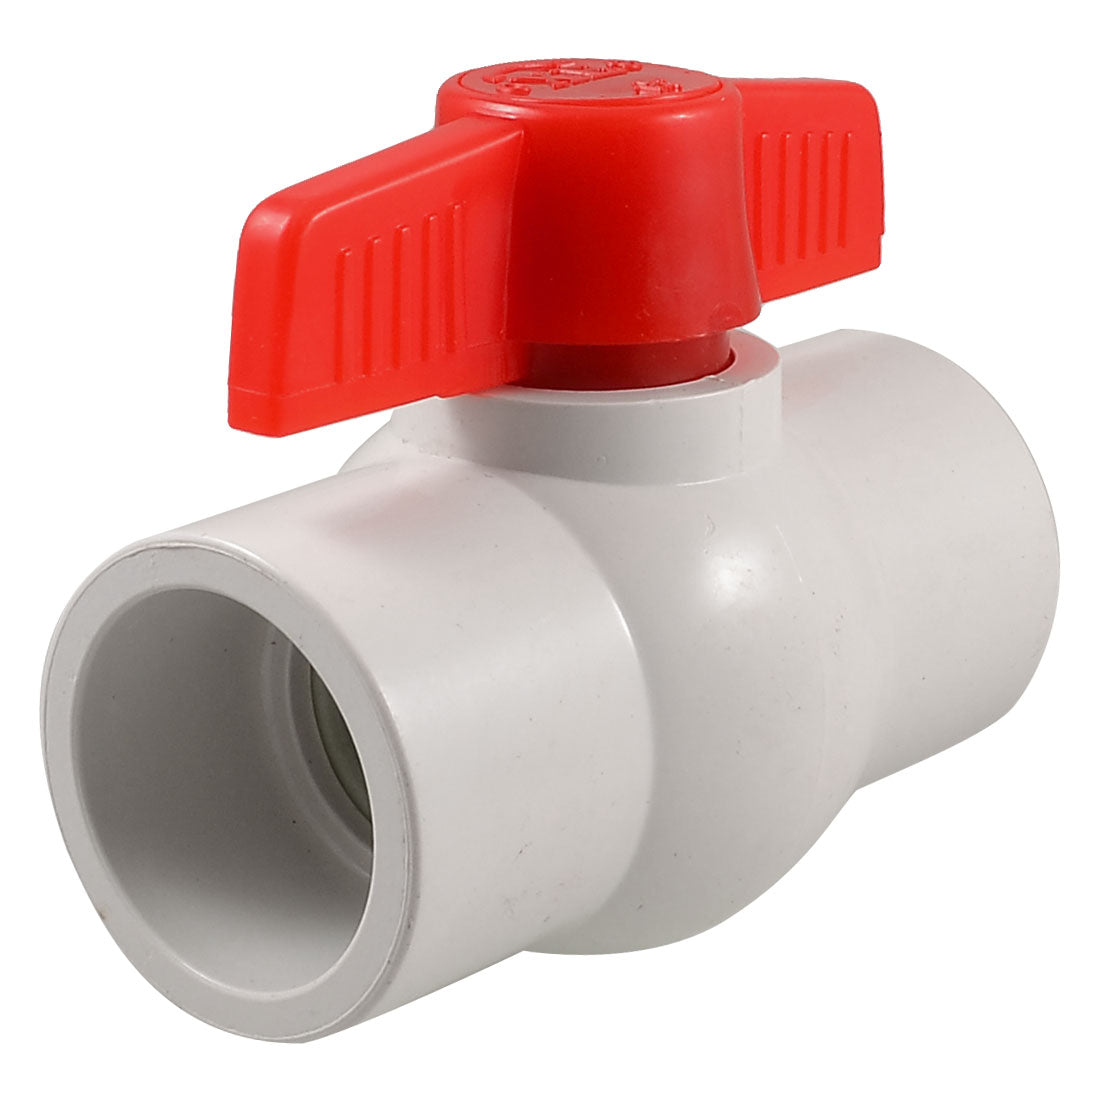 uxcell Uxcell Water Supply 1.6" x 1.6" Slip Ends 1/4 Turn PVC Ball Valve White Red